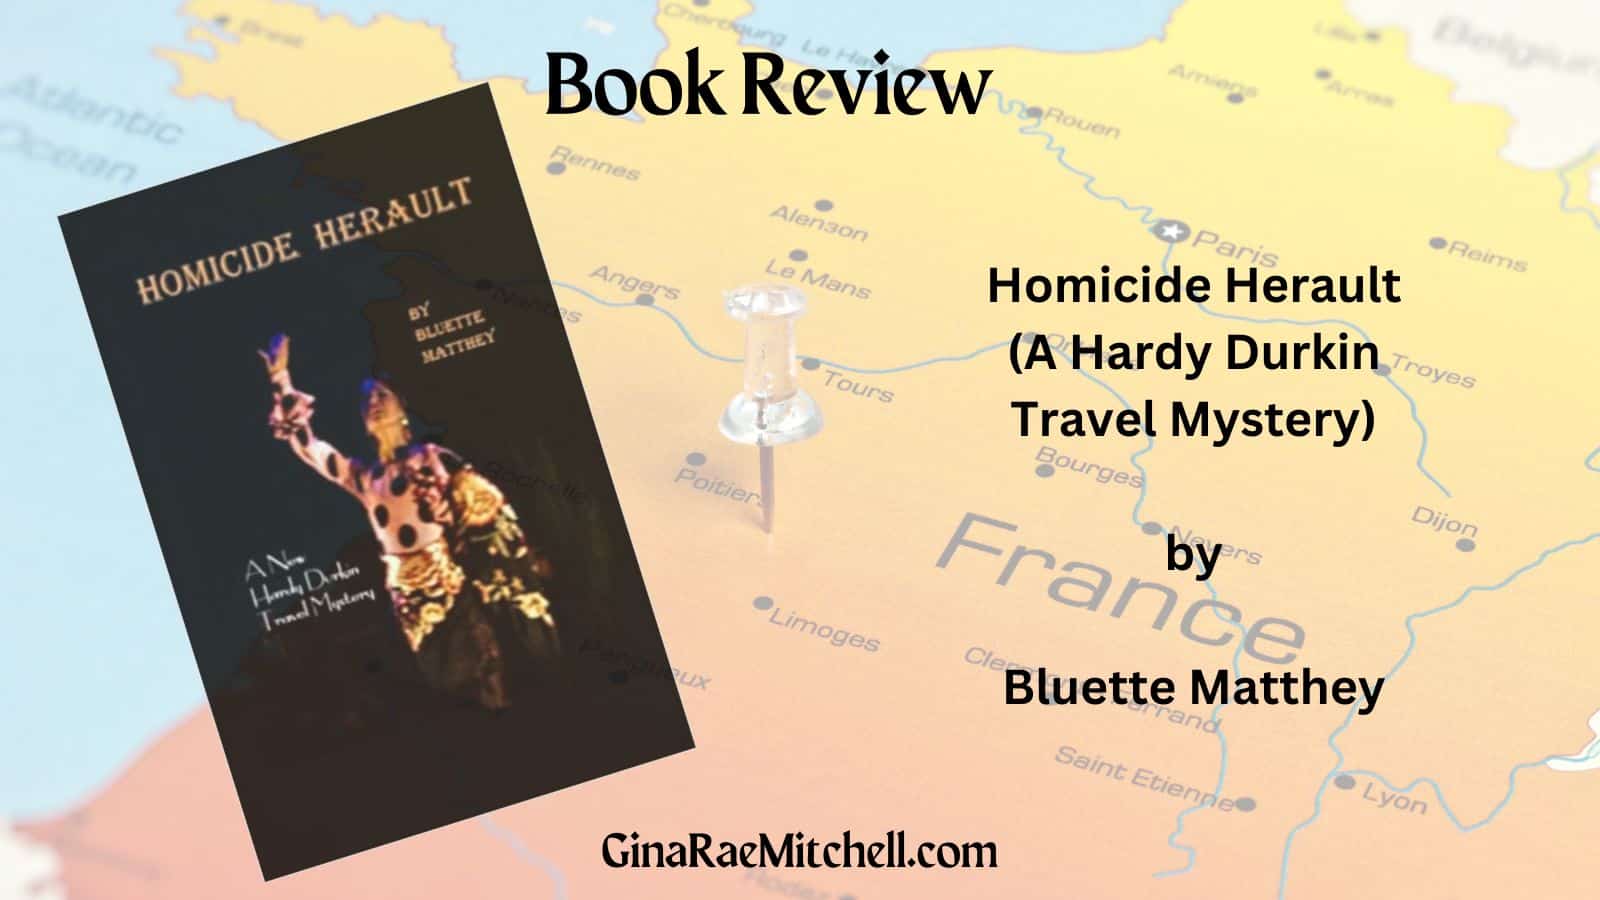 Book Review: Homicide Herault (A Hardy Durkin Travel Mystery #6) by Bluette Matthey